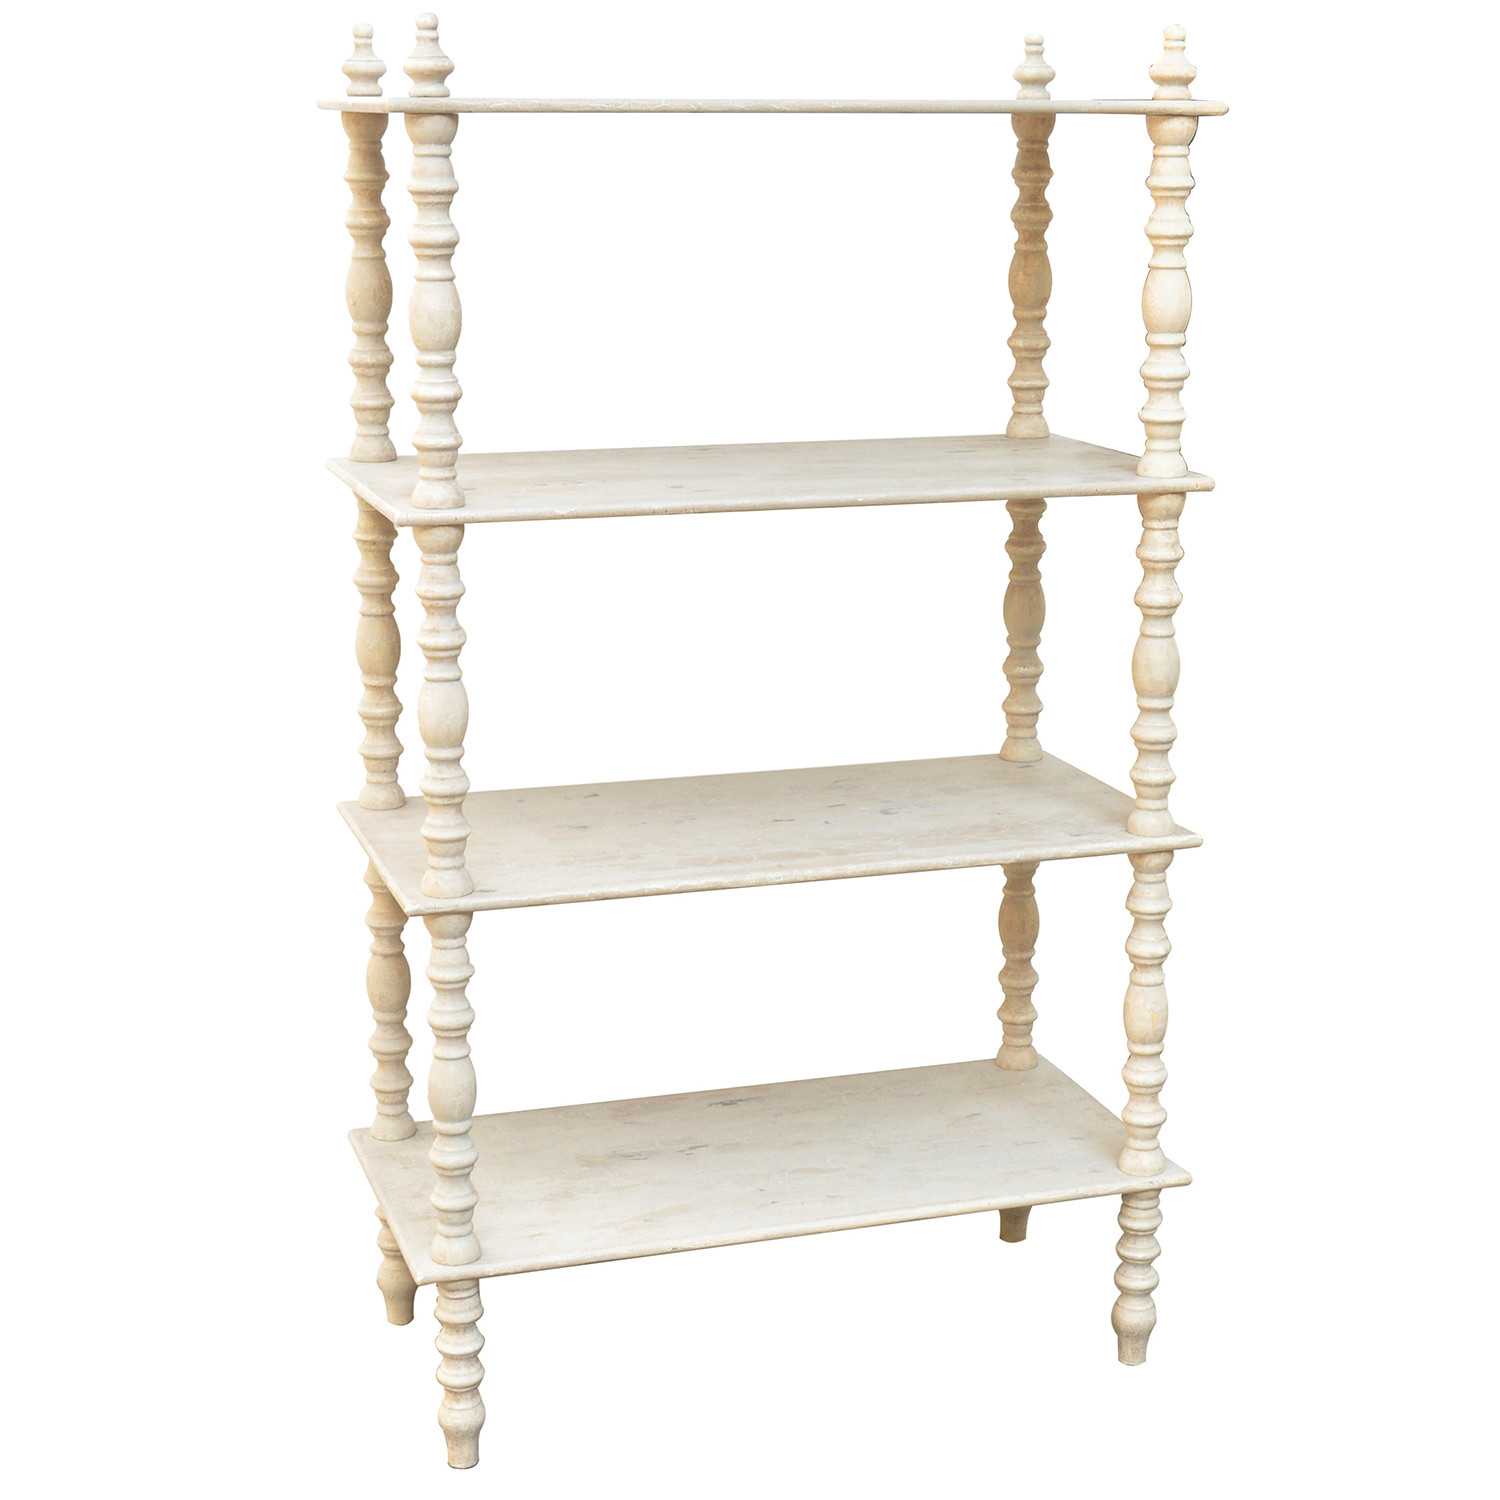 Look no further! These are THE BEST affordable bookcases with that great designer look you’ve been looking for! The bookcases are perfect for a small home office or for extra stylish storage in your living room. Check it out on A Blissful Nest! https://ablissfulnest.com/ #designtips #libraryideas #homeoffice #officeideas #homedecor #homedecorating #interiordesigntips #bookcases